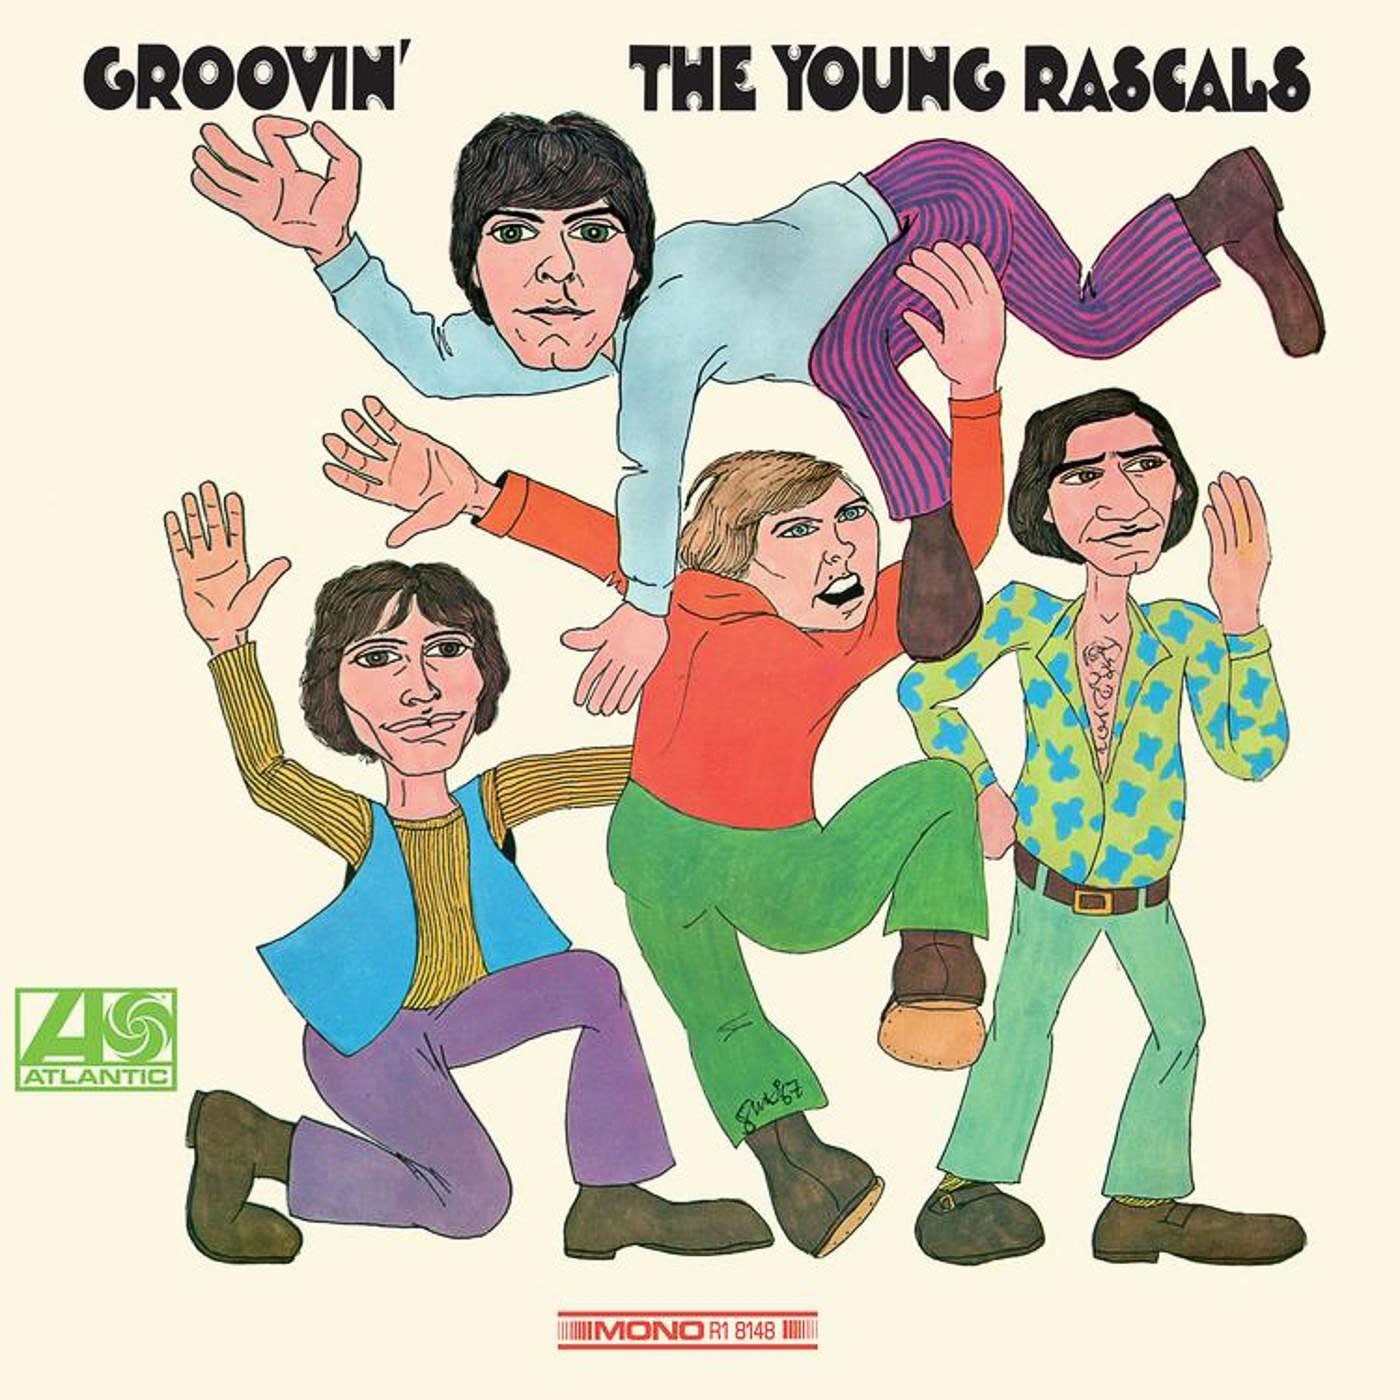 095 The Young Rascals – Groovin